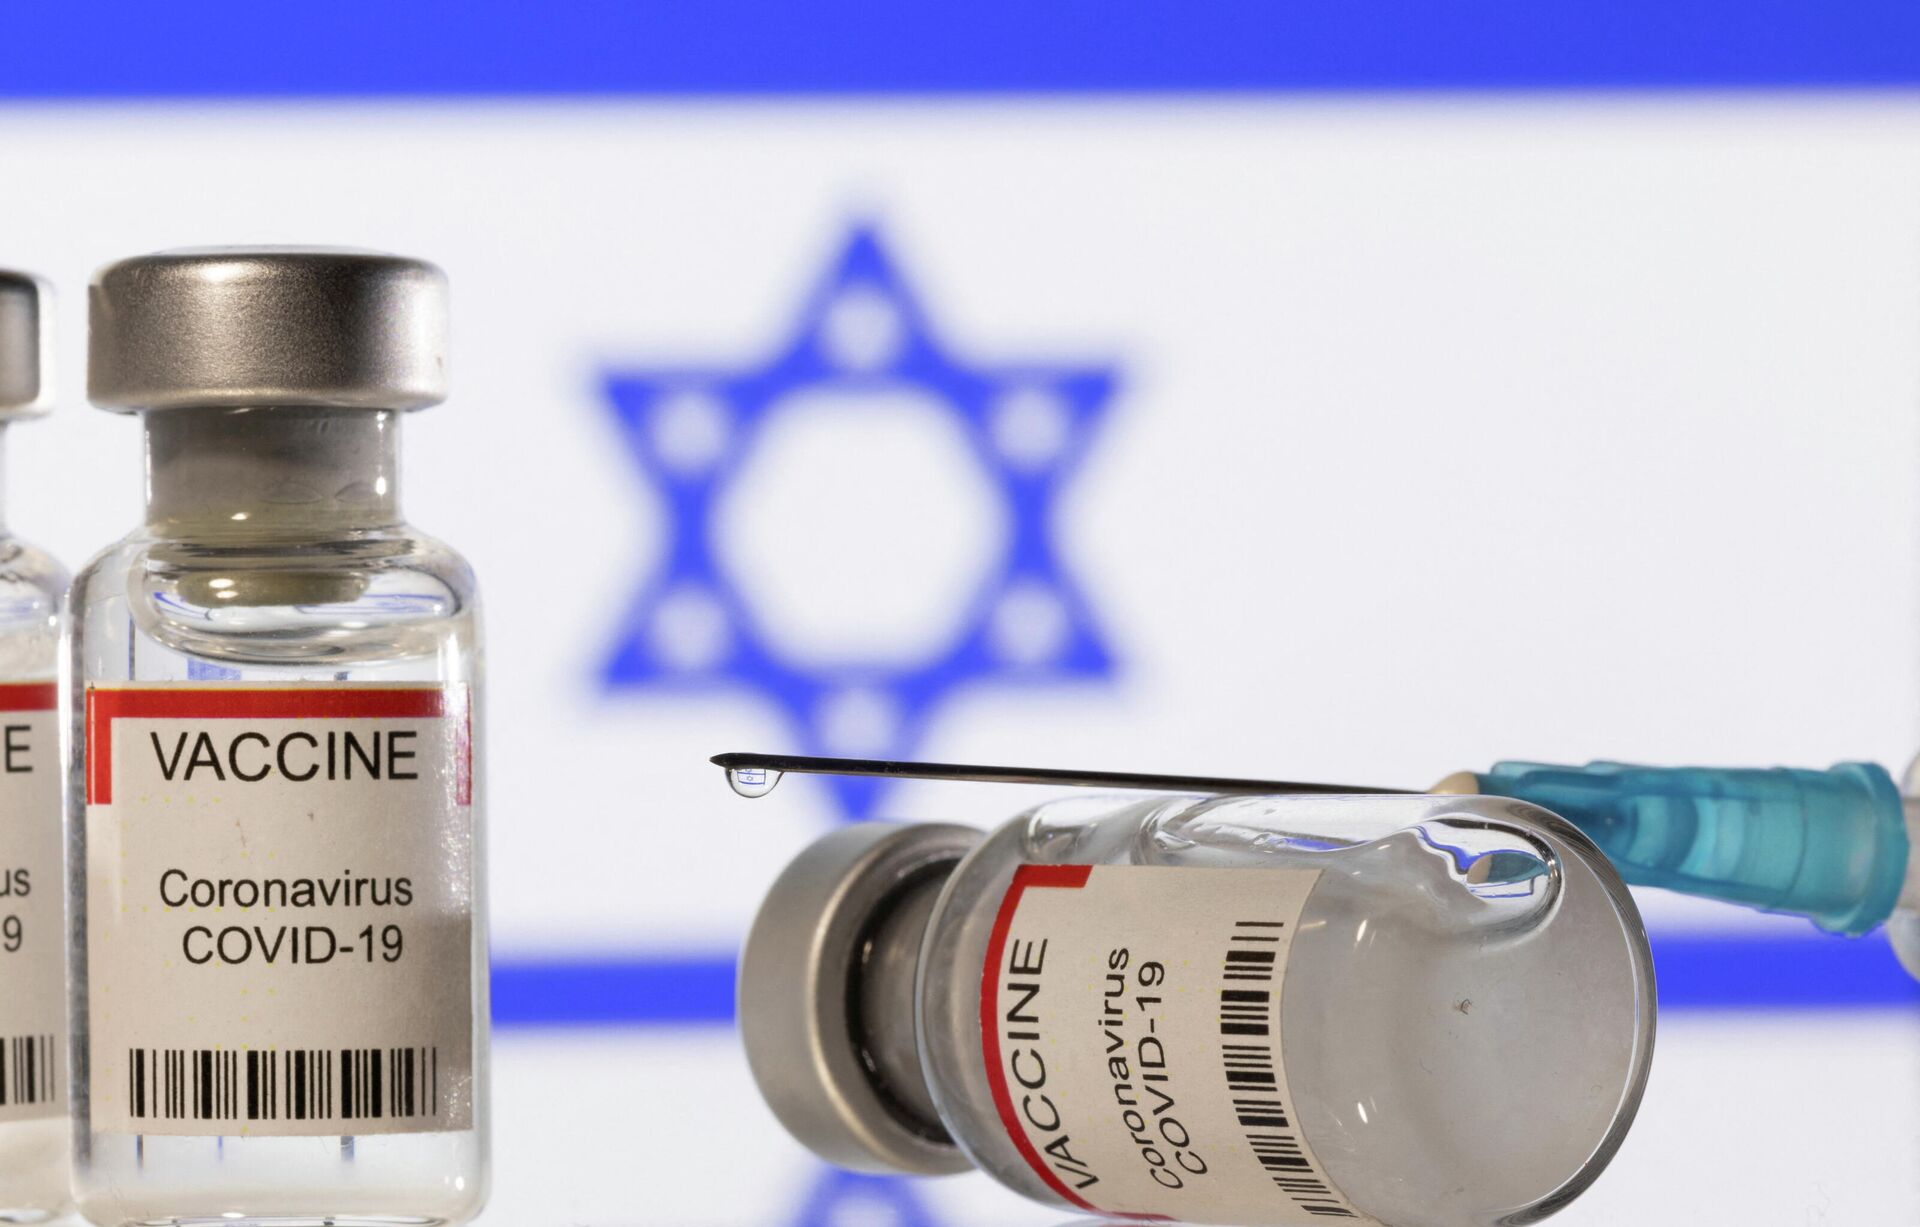 Vials labelled VACCINE Coronavirus COVID-19 and a syringe are seen in front of a displayed flag of Israel in this illustration taken December 11, 2021. - Sputnik International, 1920, 29.12.2021